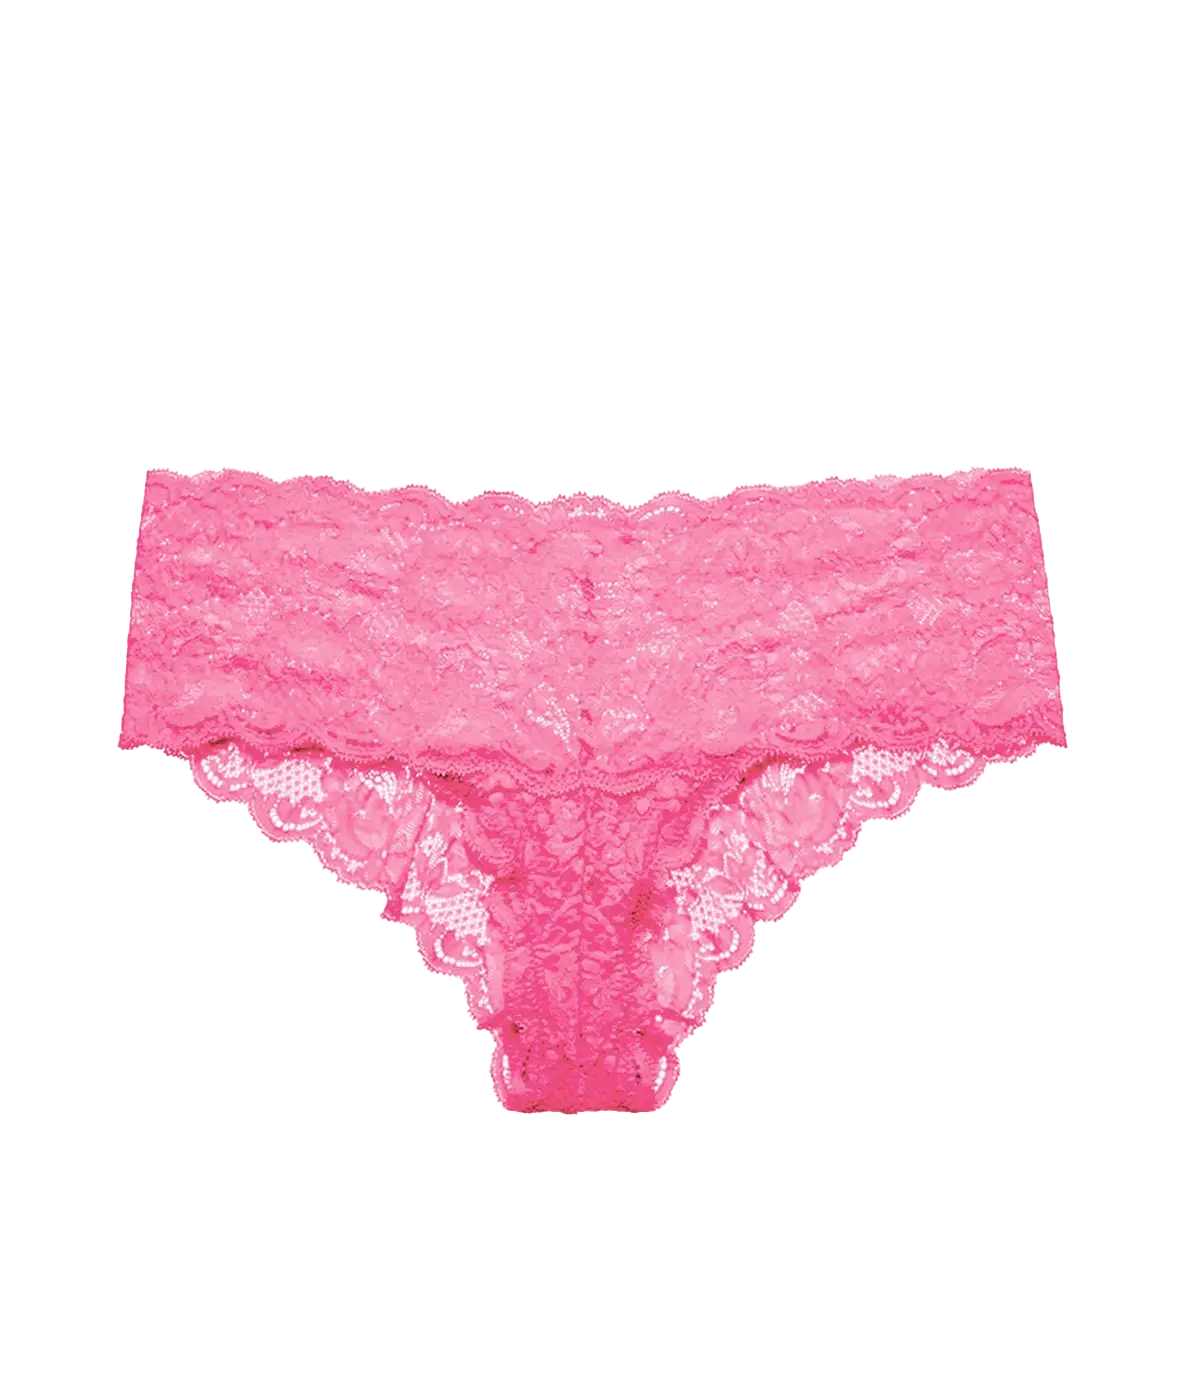 A hot pink Italian lace boyshort underpant, with a full coverage bottom, high waist and scallop lace detaling. Recovery, Italian lace, comfortable, everyday wear. 